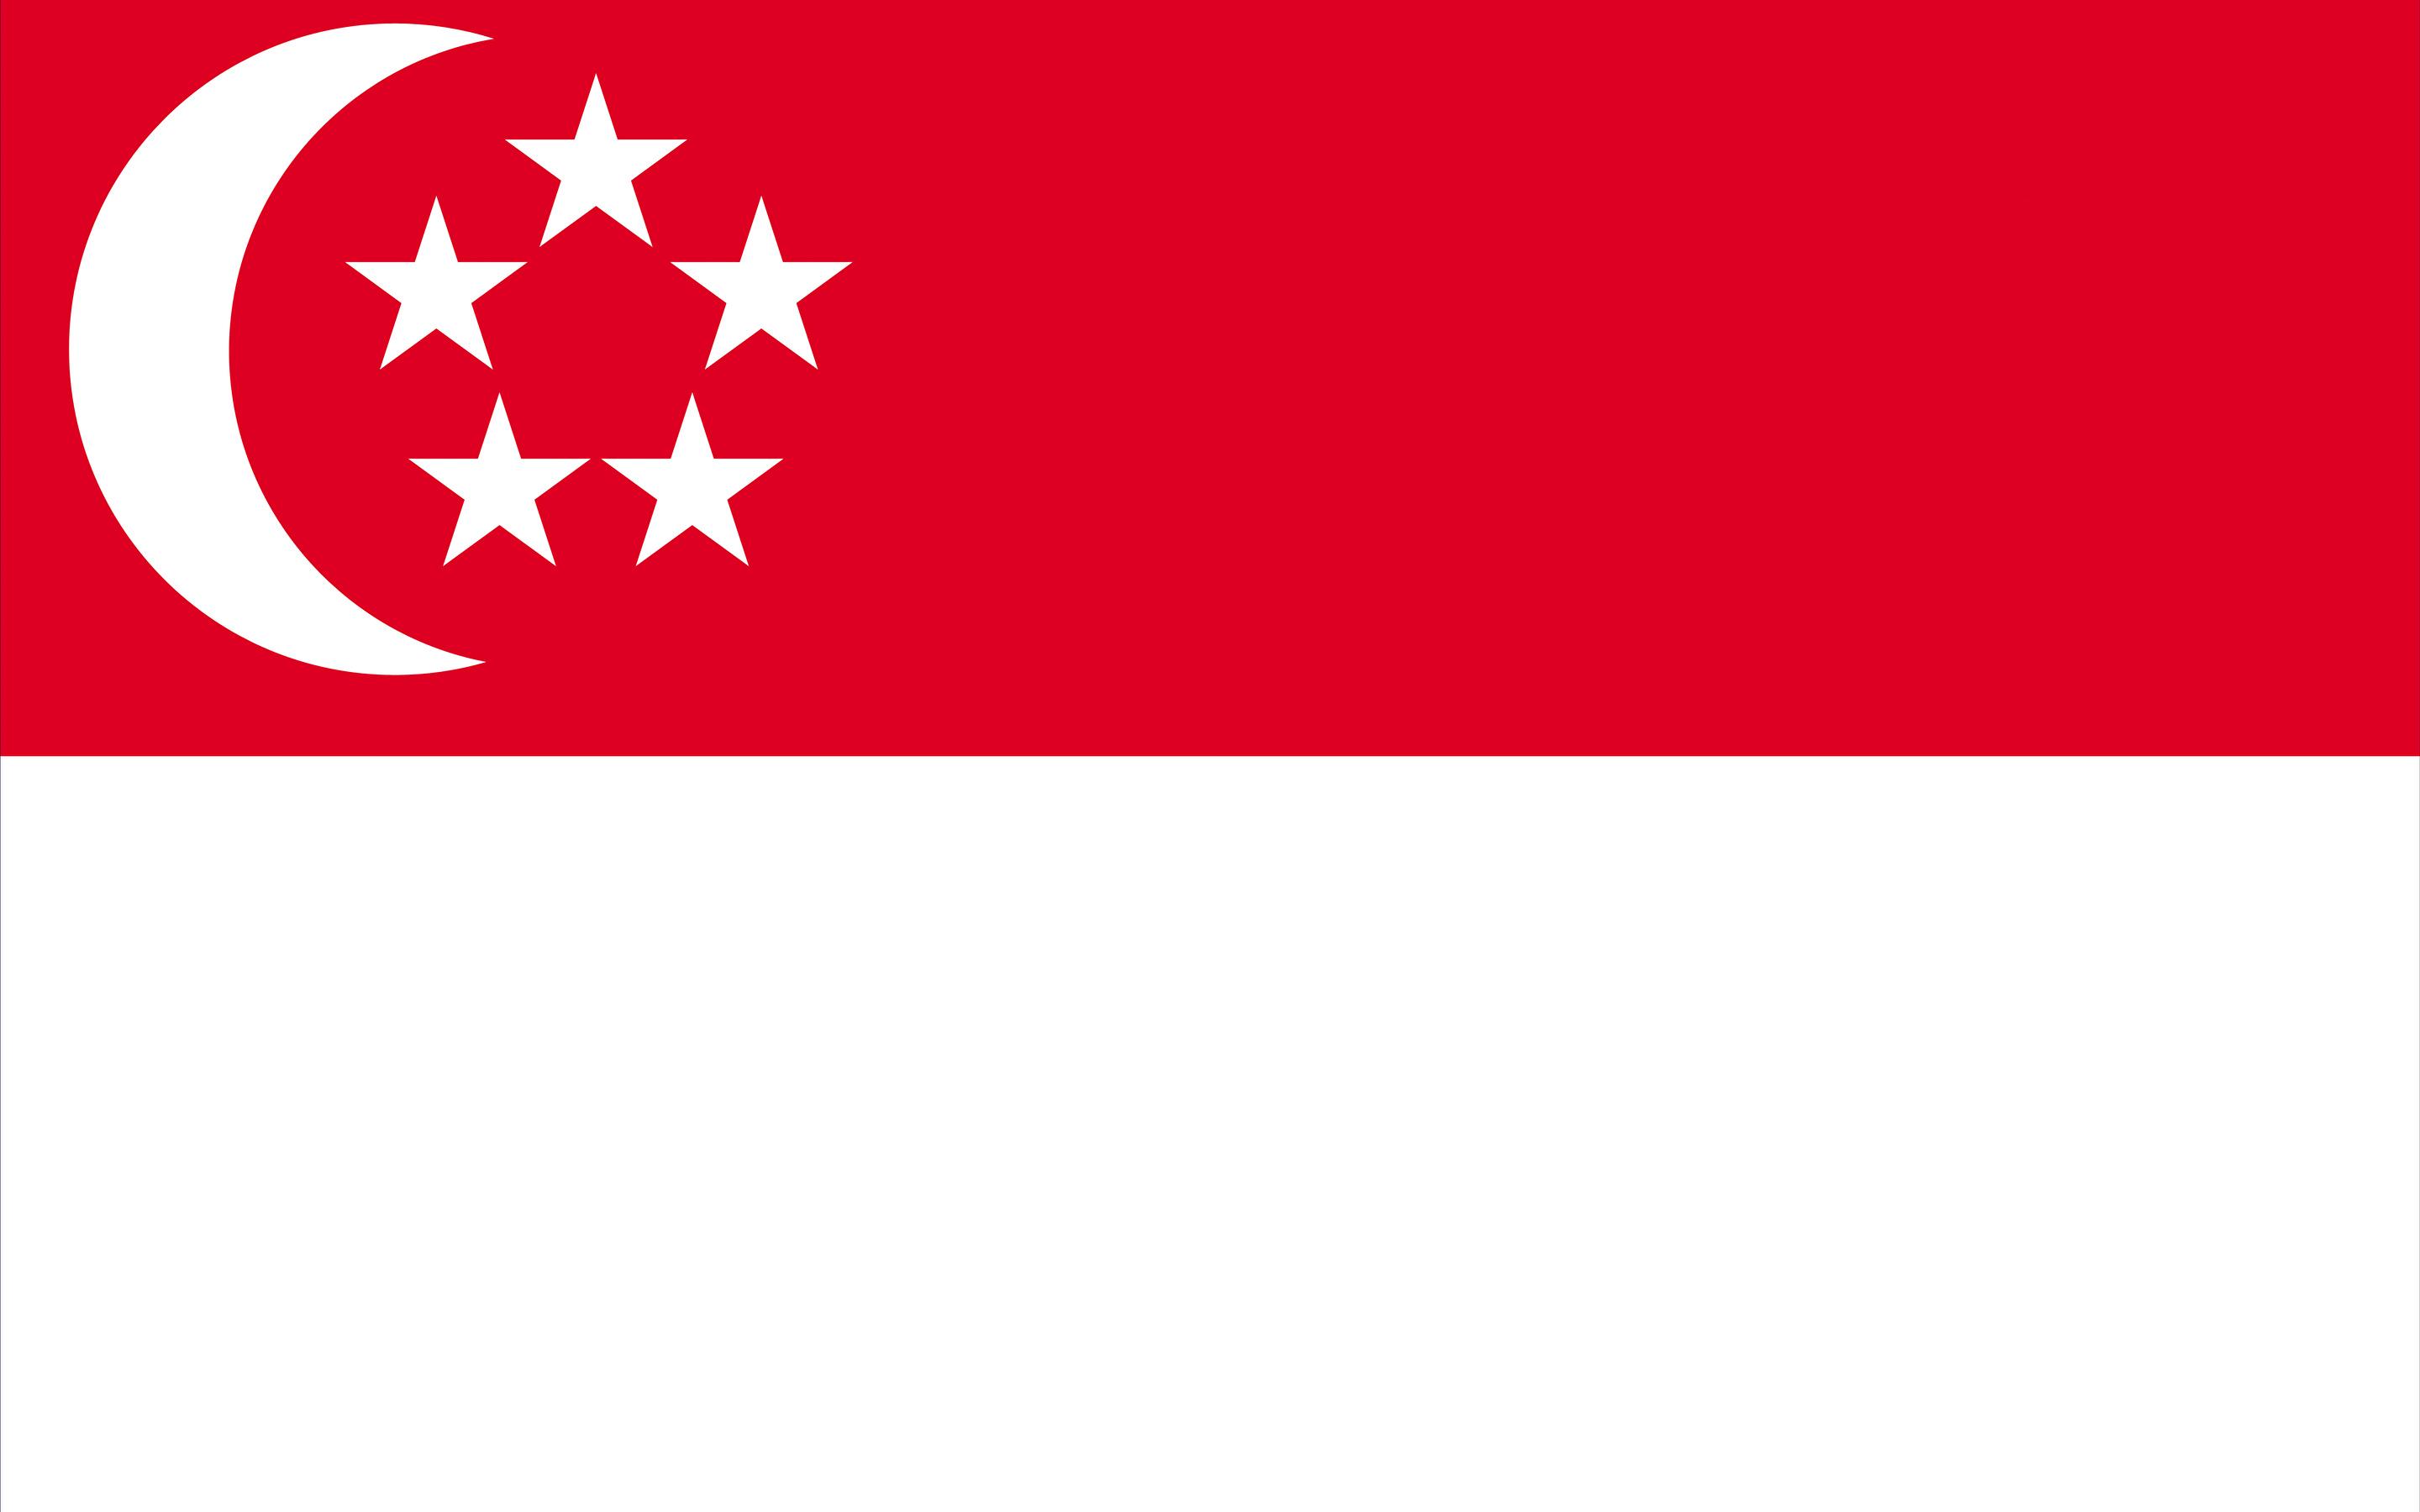 7 star red flag with red and white stripes